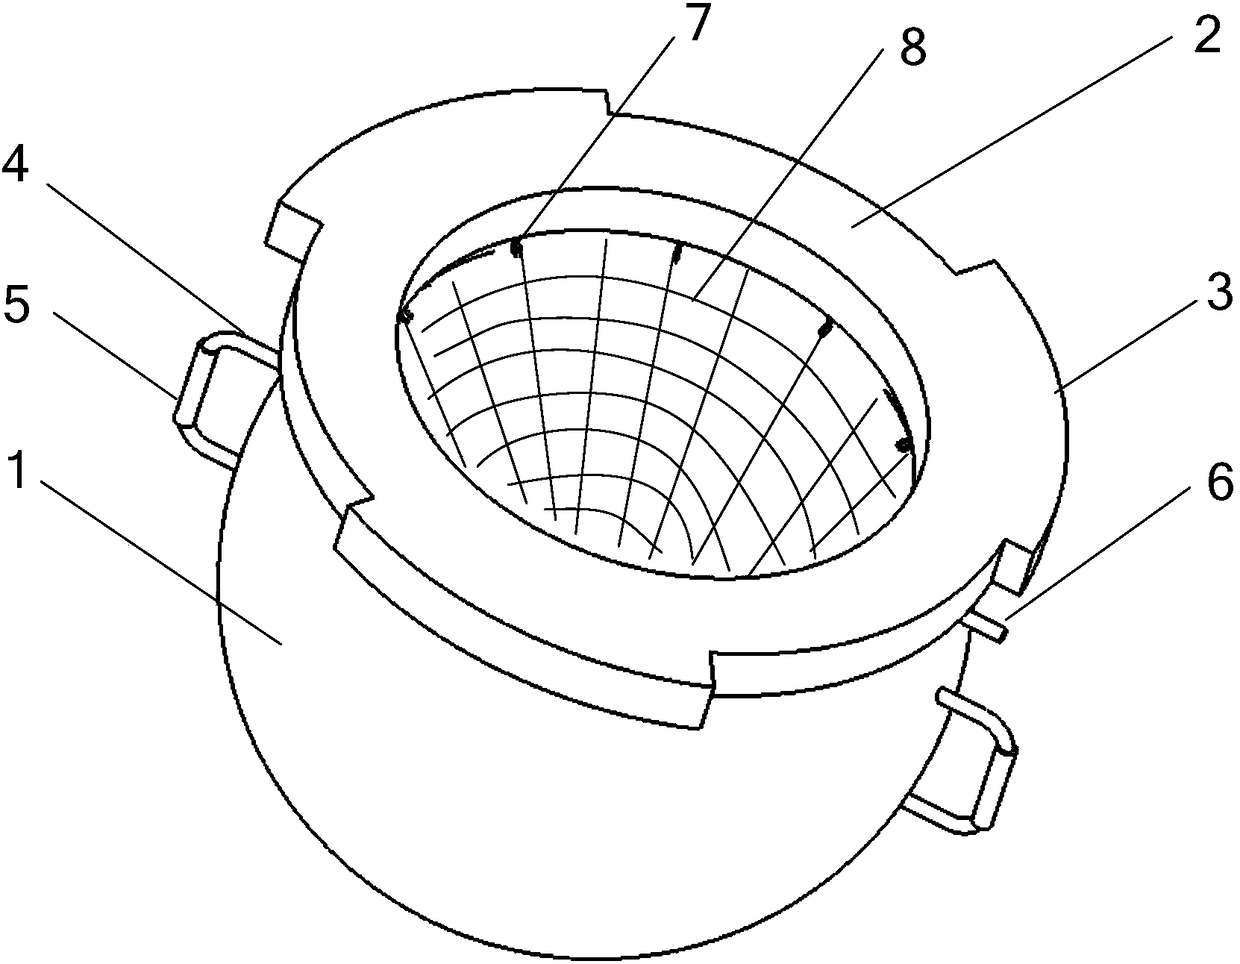 A portable directional explosion-proof device in the cabin of a civil aircraft